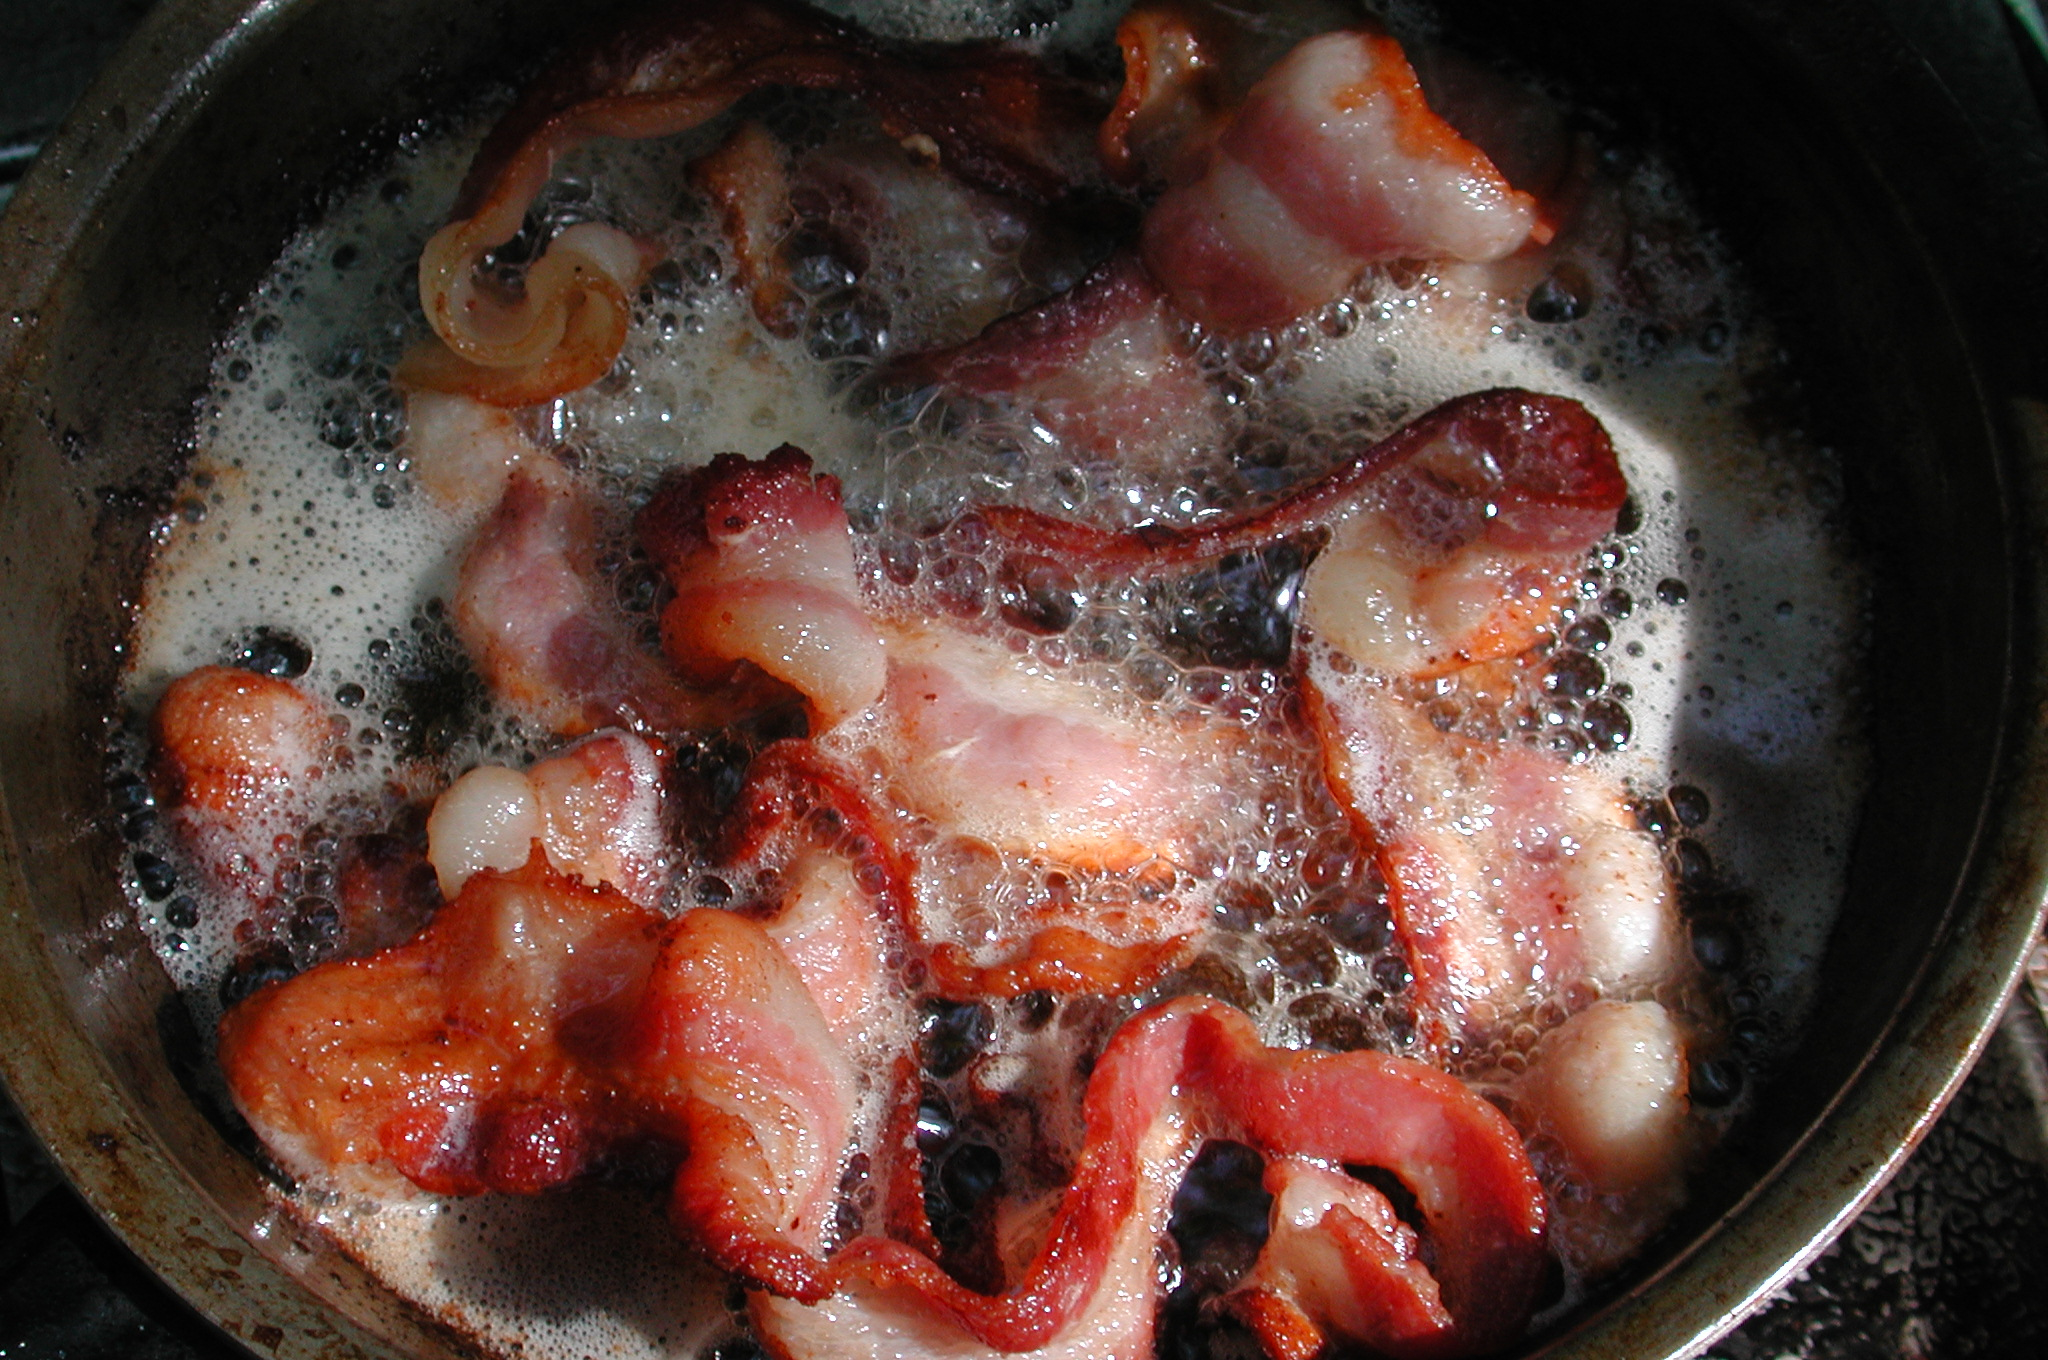 Bacon sizzling in a pan